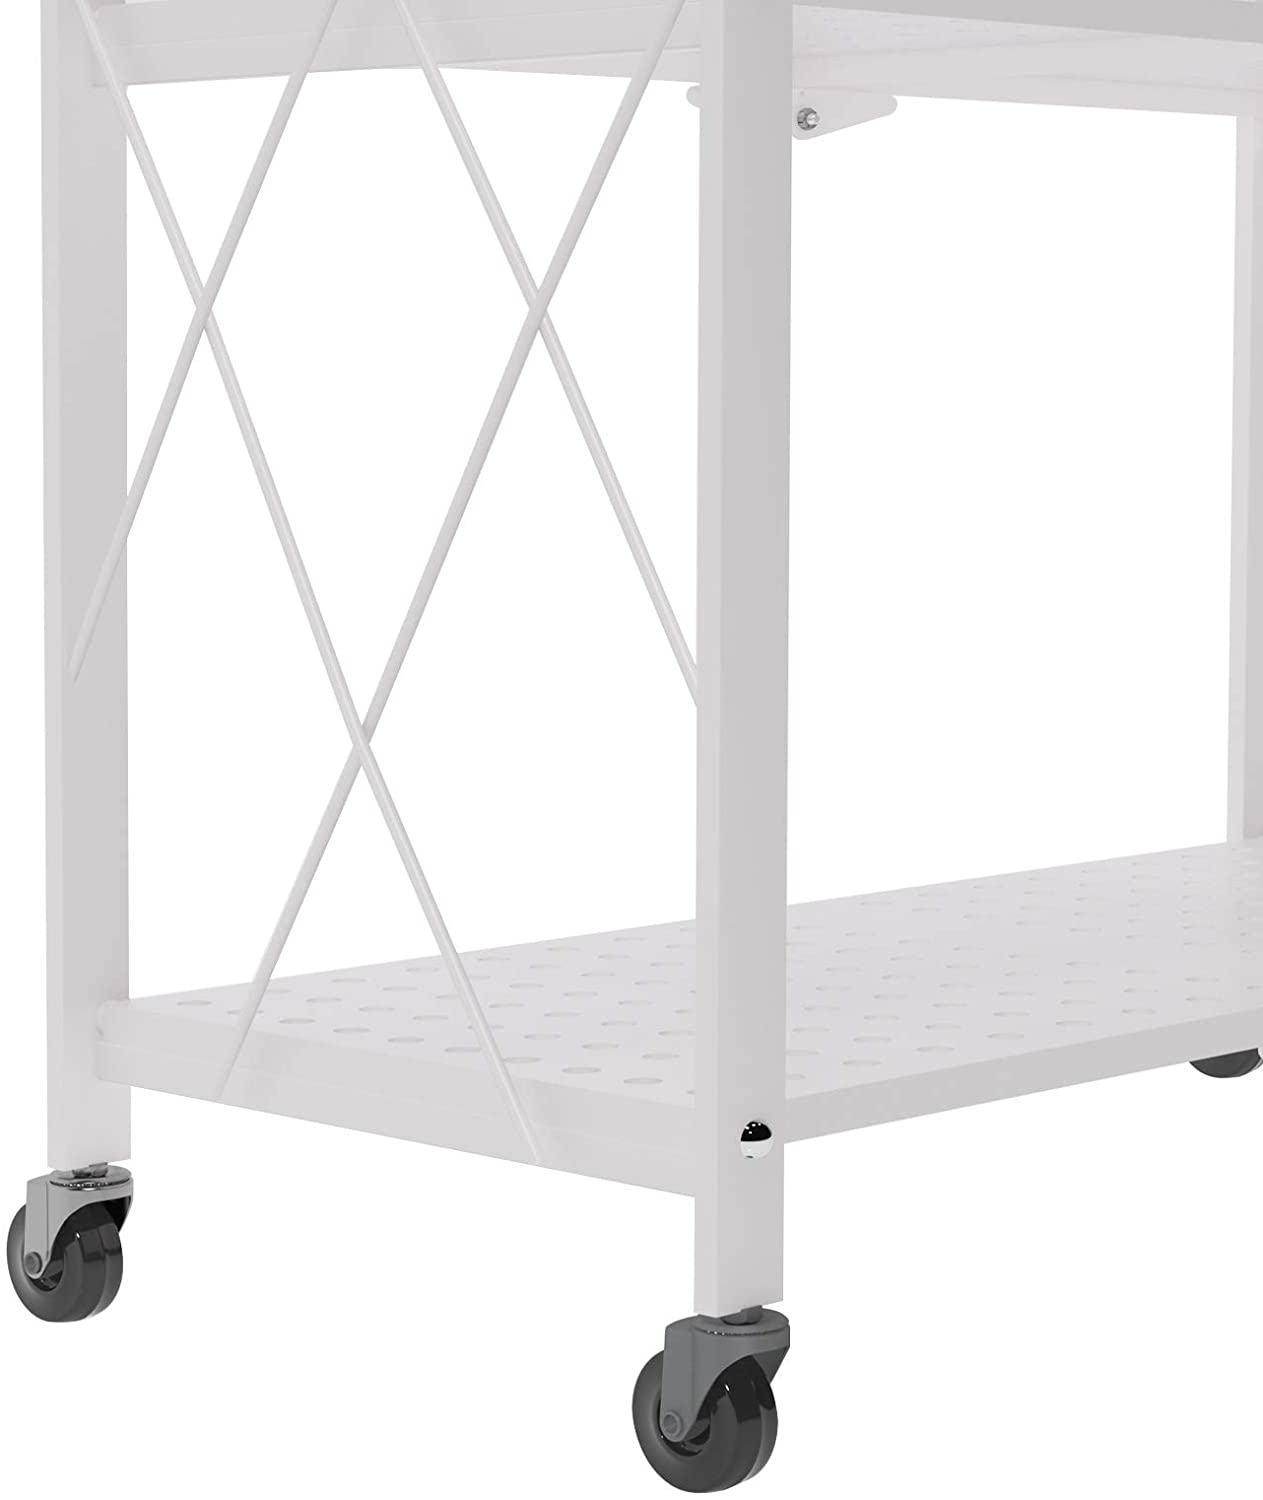 SogesPower Foldable Metal Standing Shelf 5 Tiers Storage Rack with Wheels， Easy Moving Cart， White